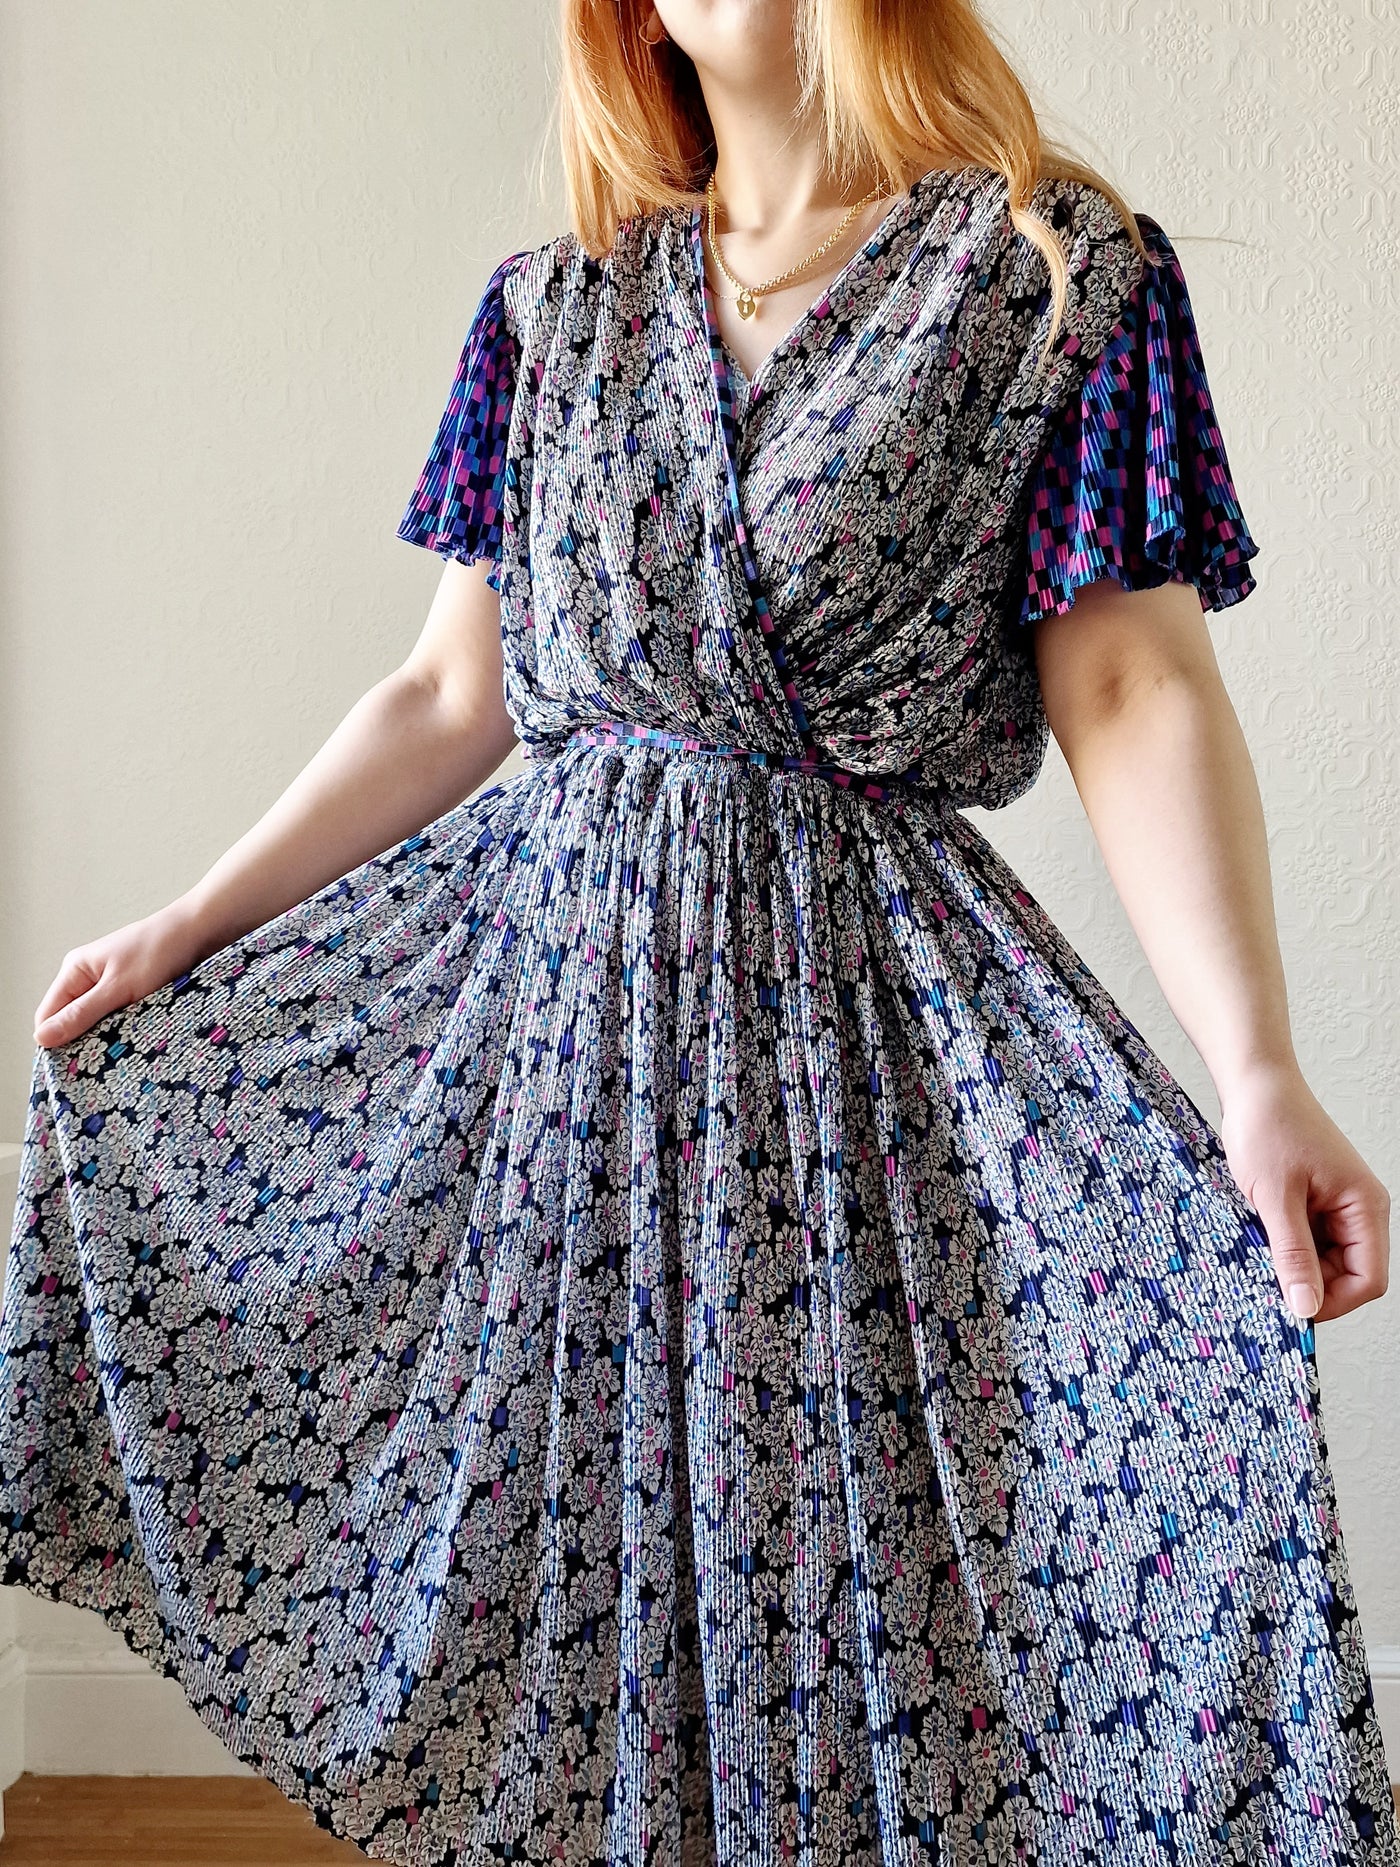 Vintage 80s Purple, Blue and Pink Floral Midi Dress with Angel Sleeves - M